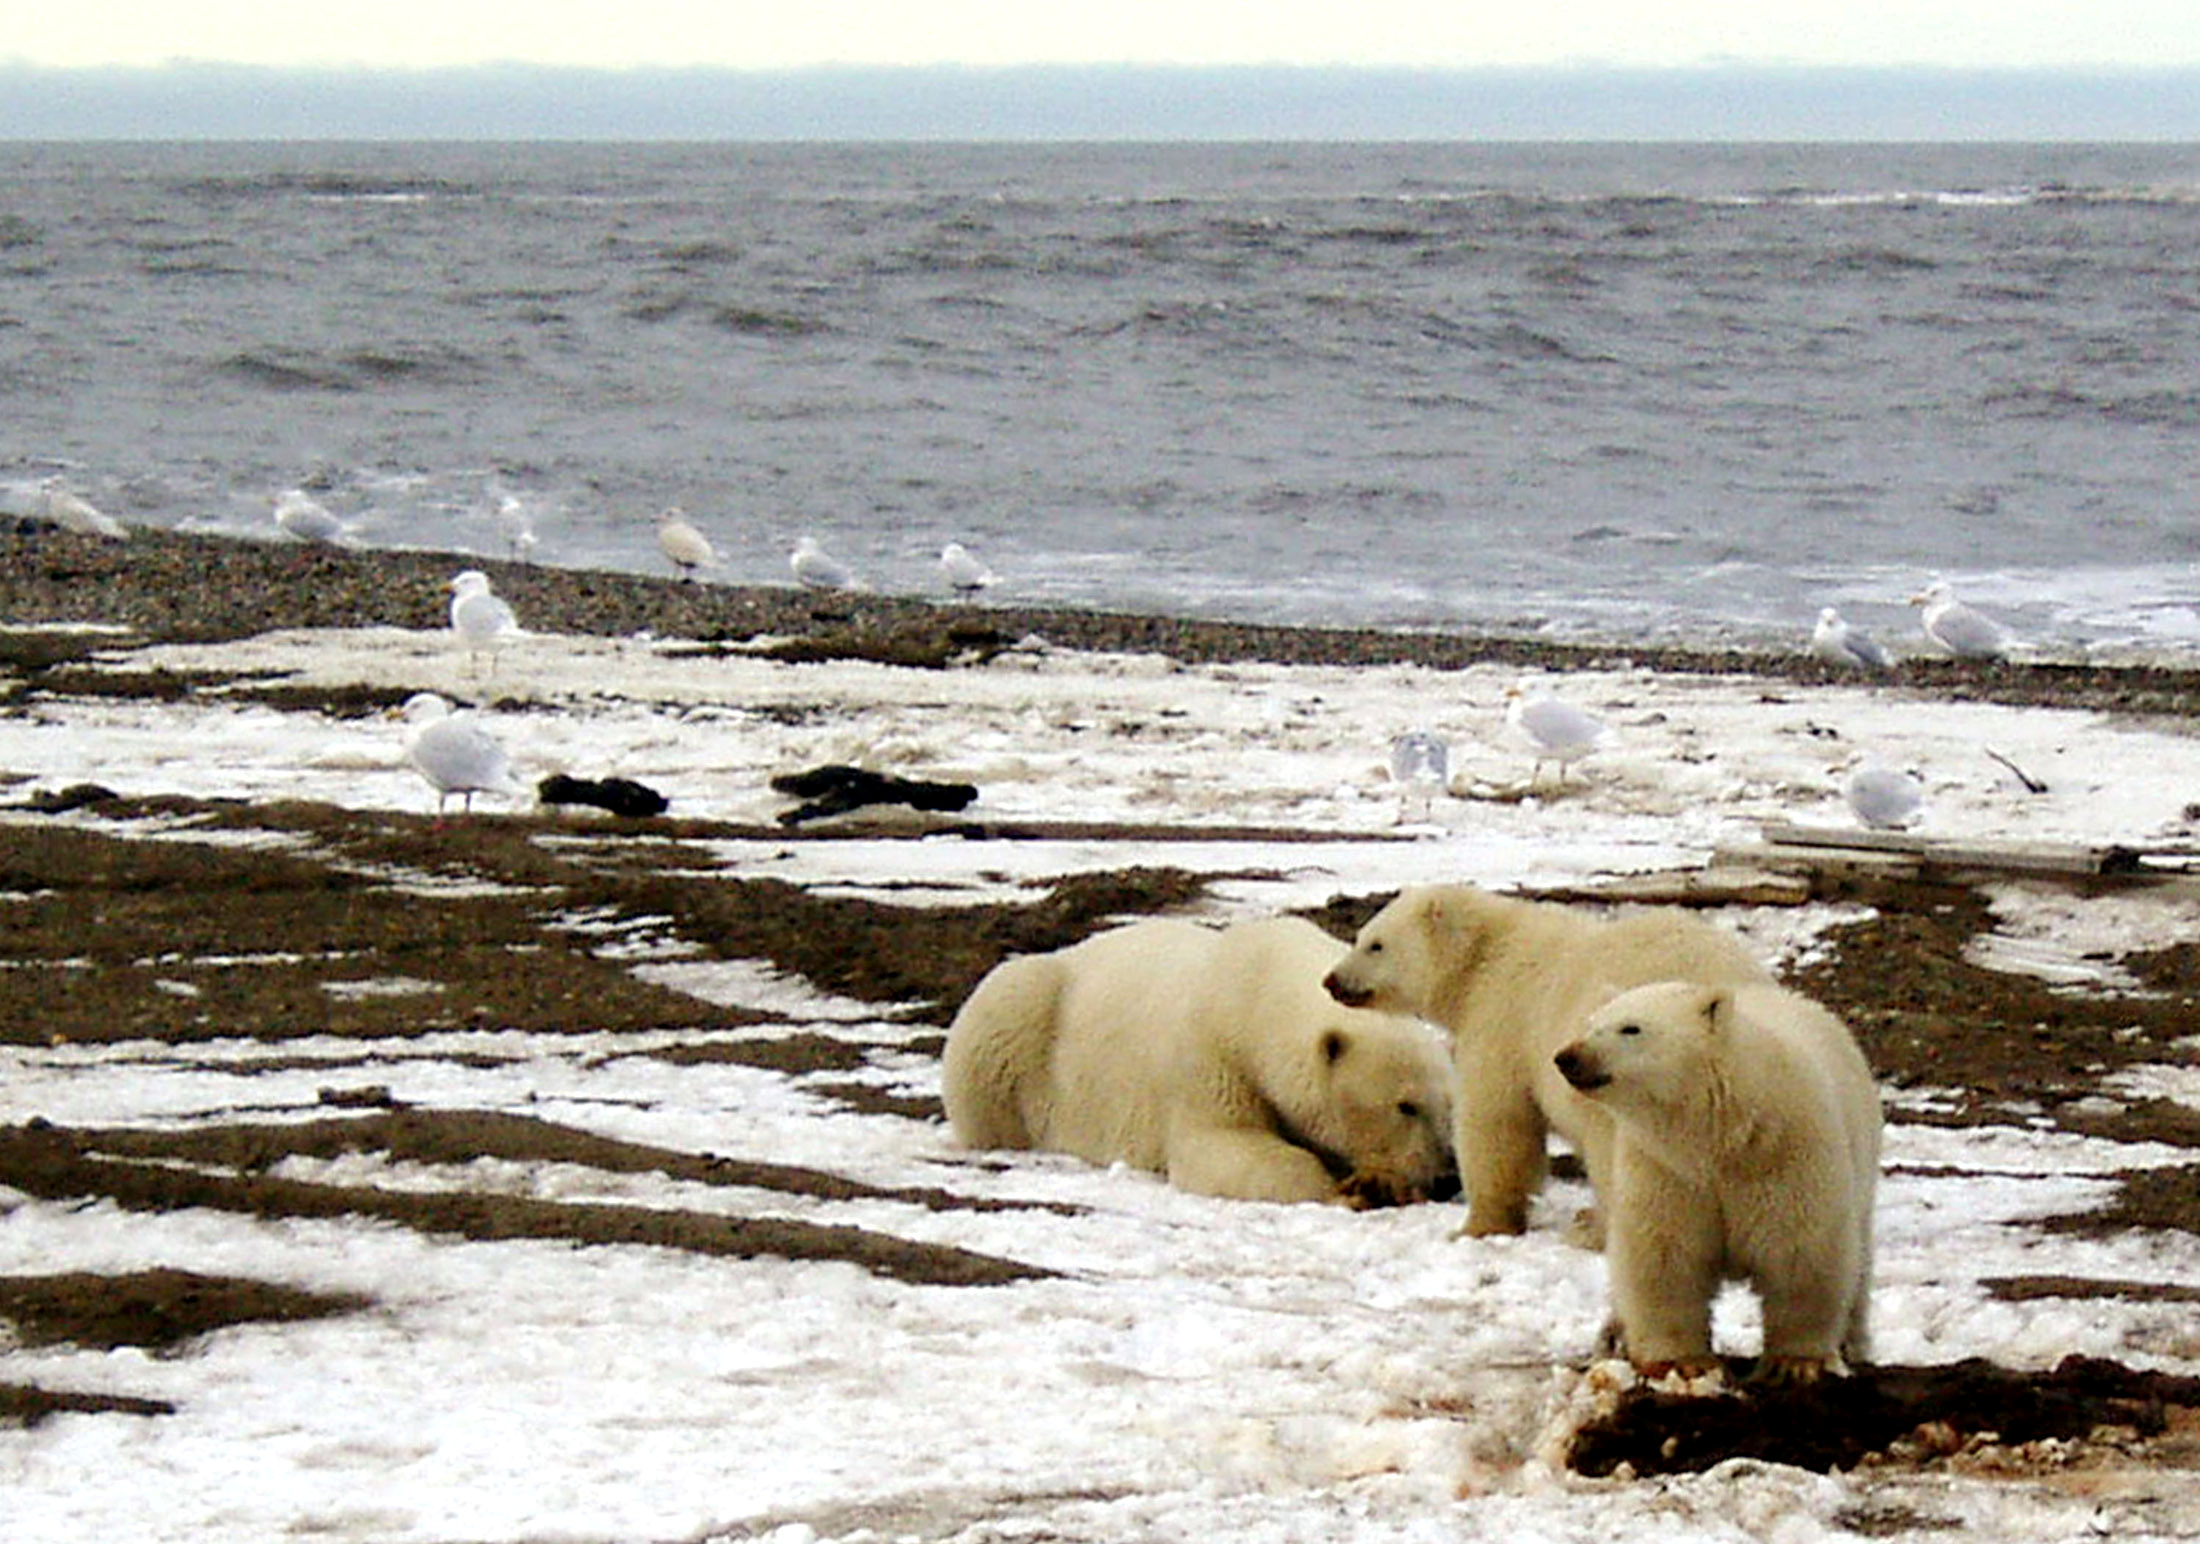 Polar bears are seen within the 1002 Area of the Arctic National Wildlife Refuge